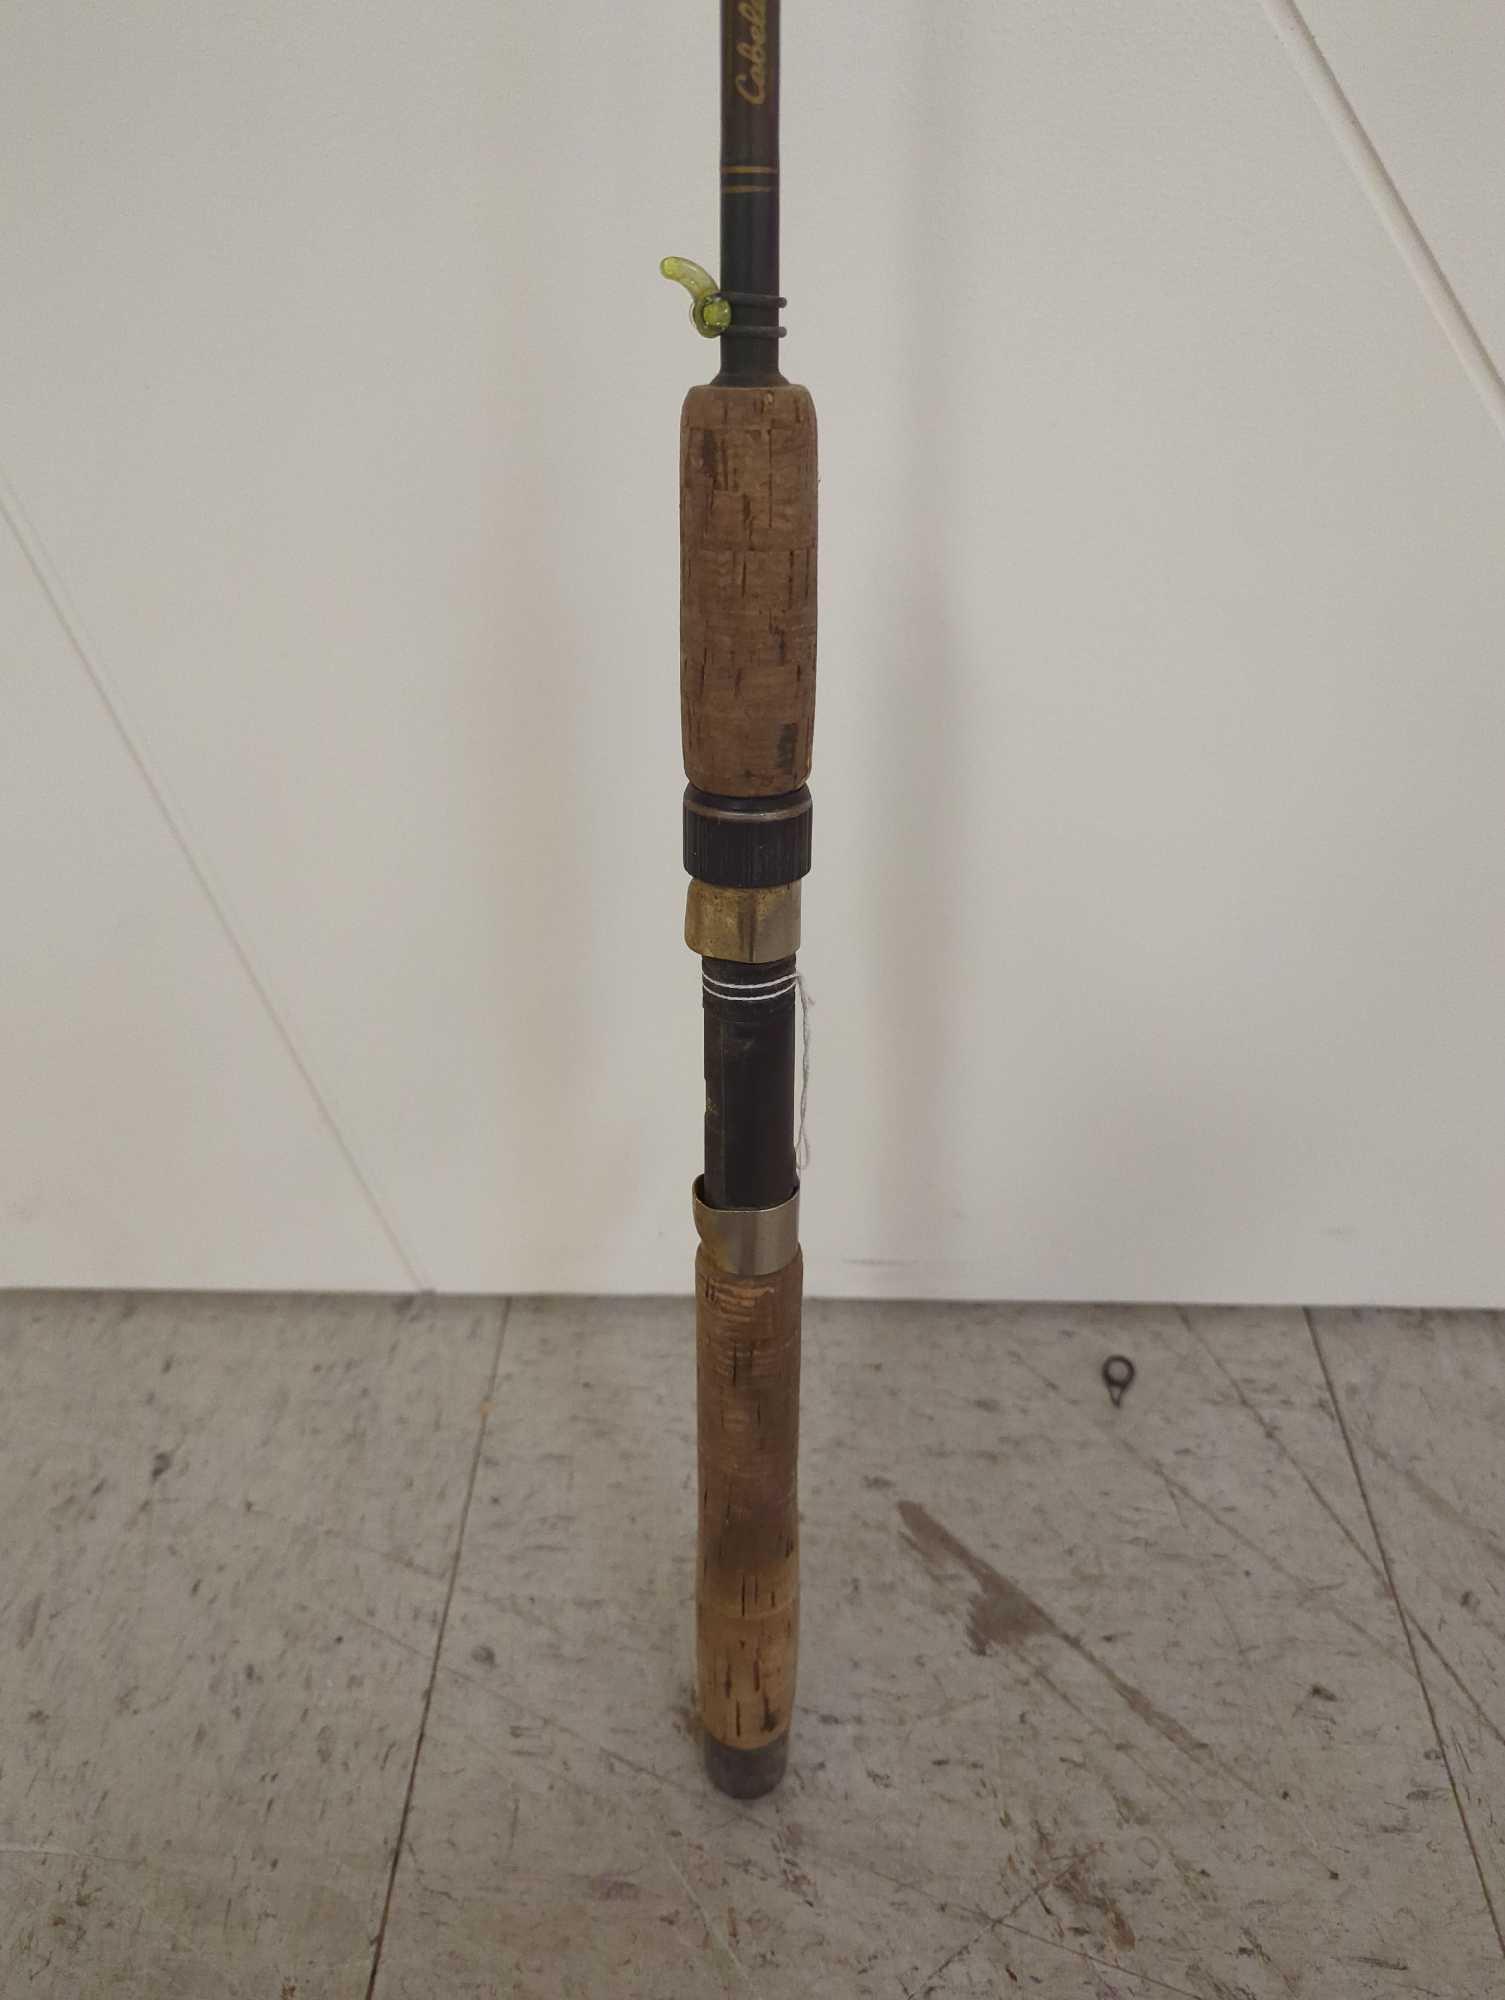 Cabela's 6' fish Eagle graphite fishing rod. Line weight: 6-12 lb Lure weight: 1/4-5/8oz Comes as is